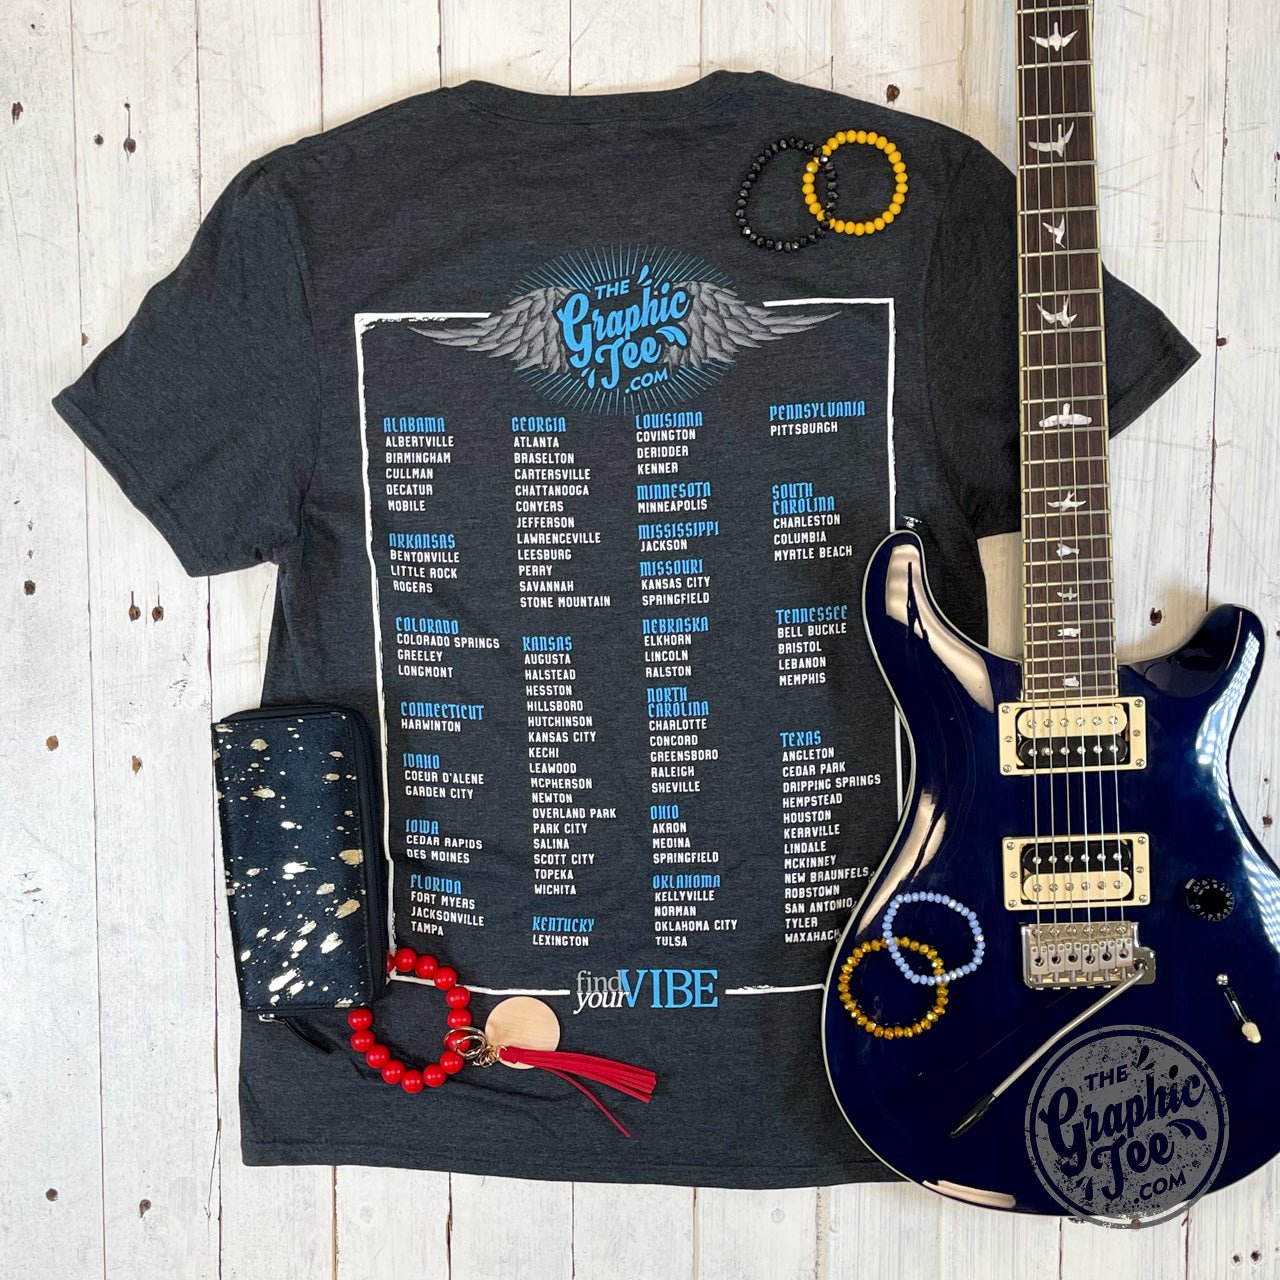 The Graphic Tee US Tour Concert Unisex Short Sleeve Tee - The Graphic Tee